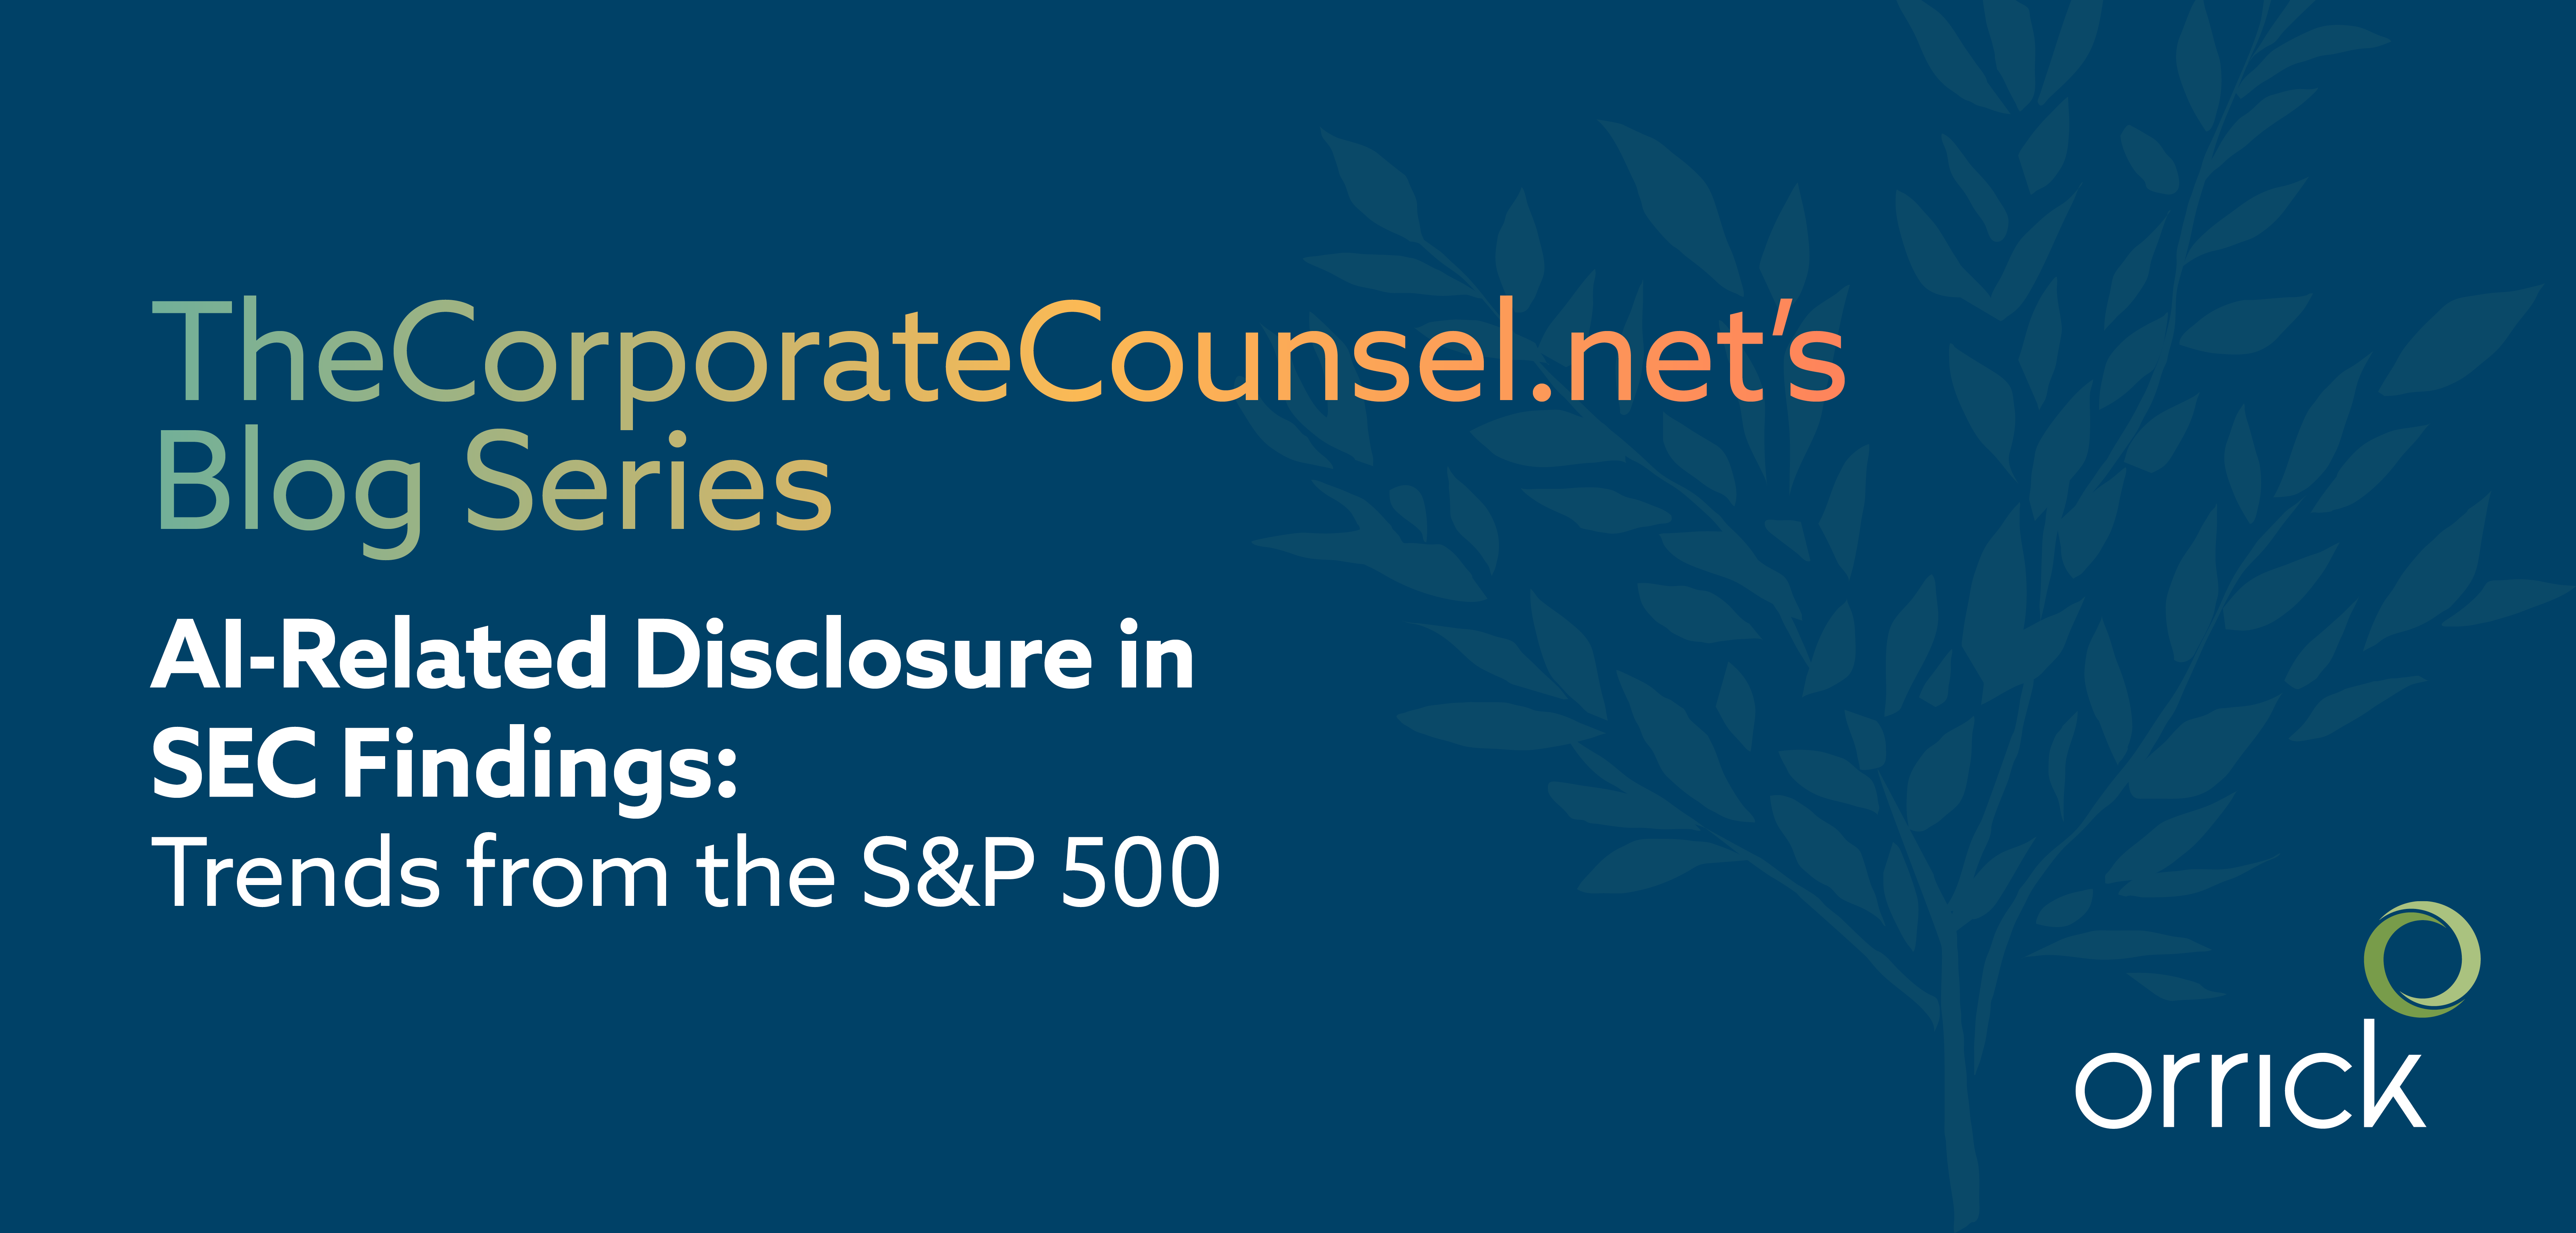 thecorporatecounsel.net's blog series | AI-Related Disclosure in SEC Findings: Trends from the S&P 500